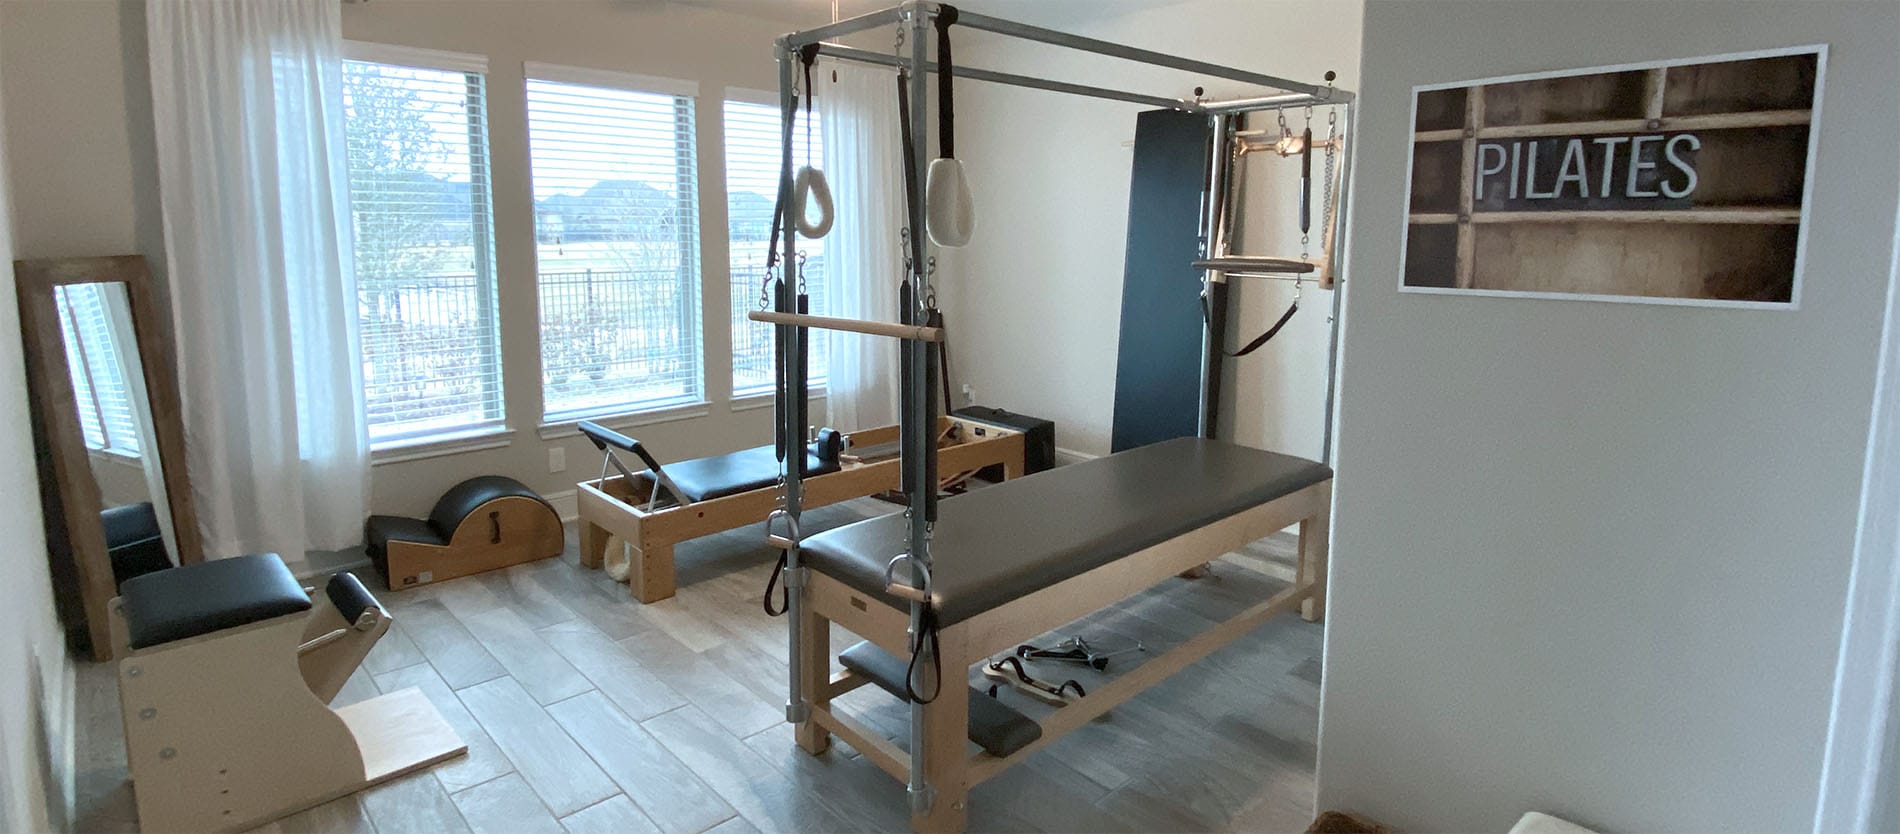 Learn About Tracy Van Swol's Private Pilates Studio in Richmond